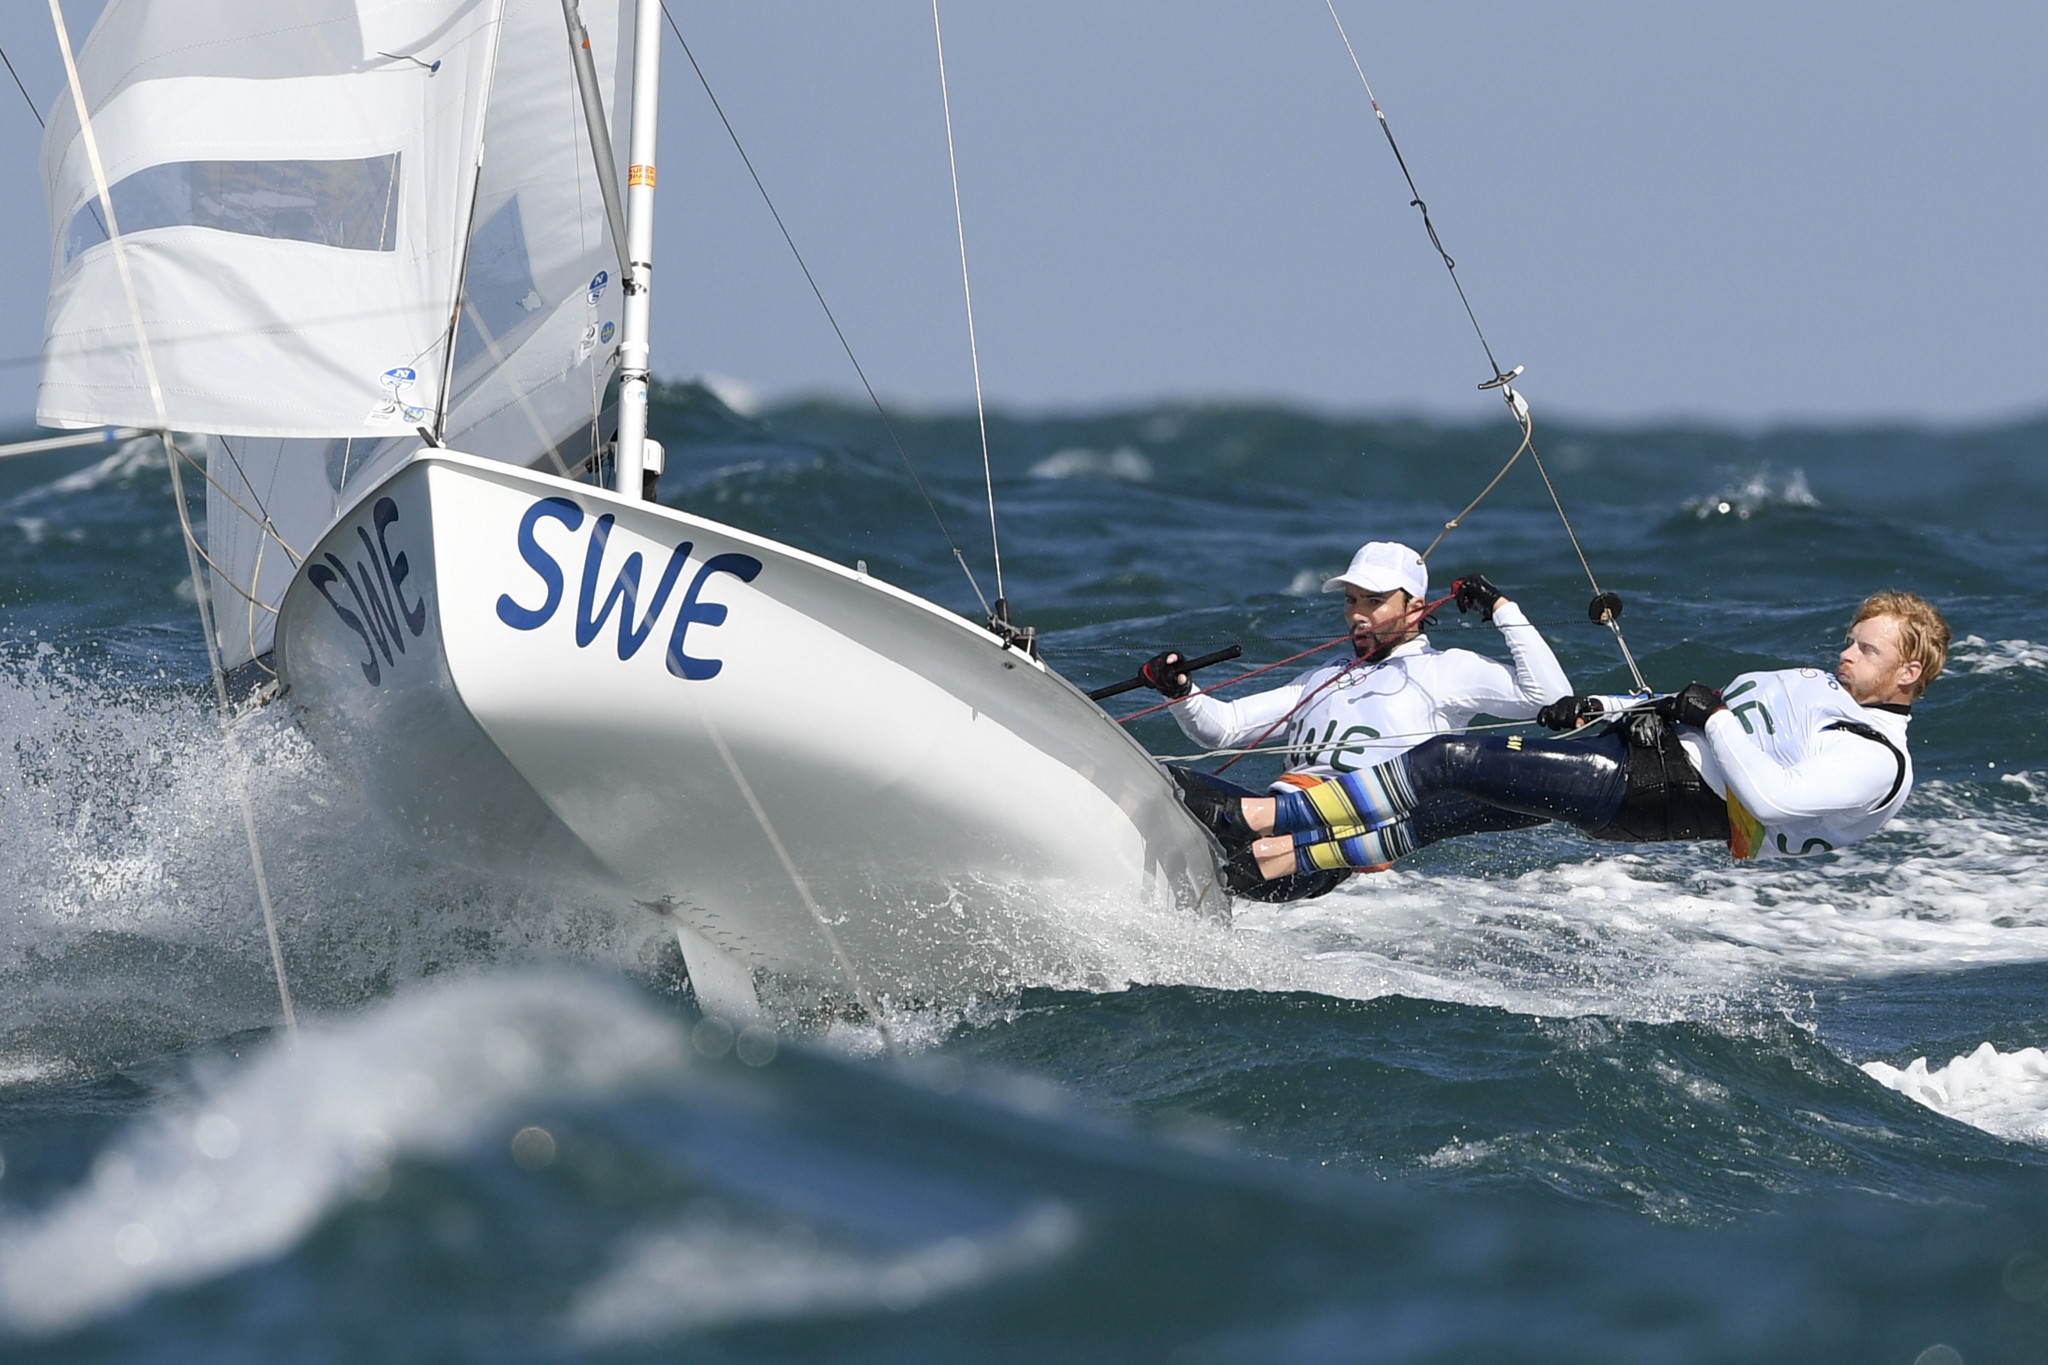 Swedish duo take lead in men's event as racing begins at 470 World Championships at Tokyo 2020 venue